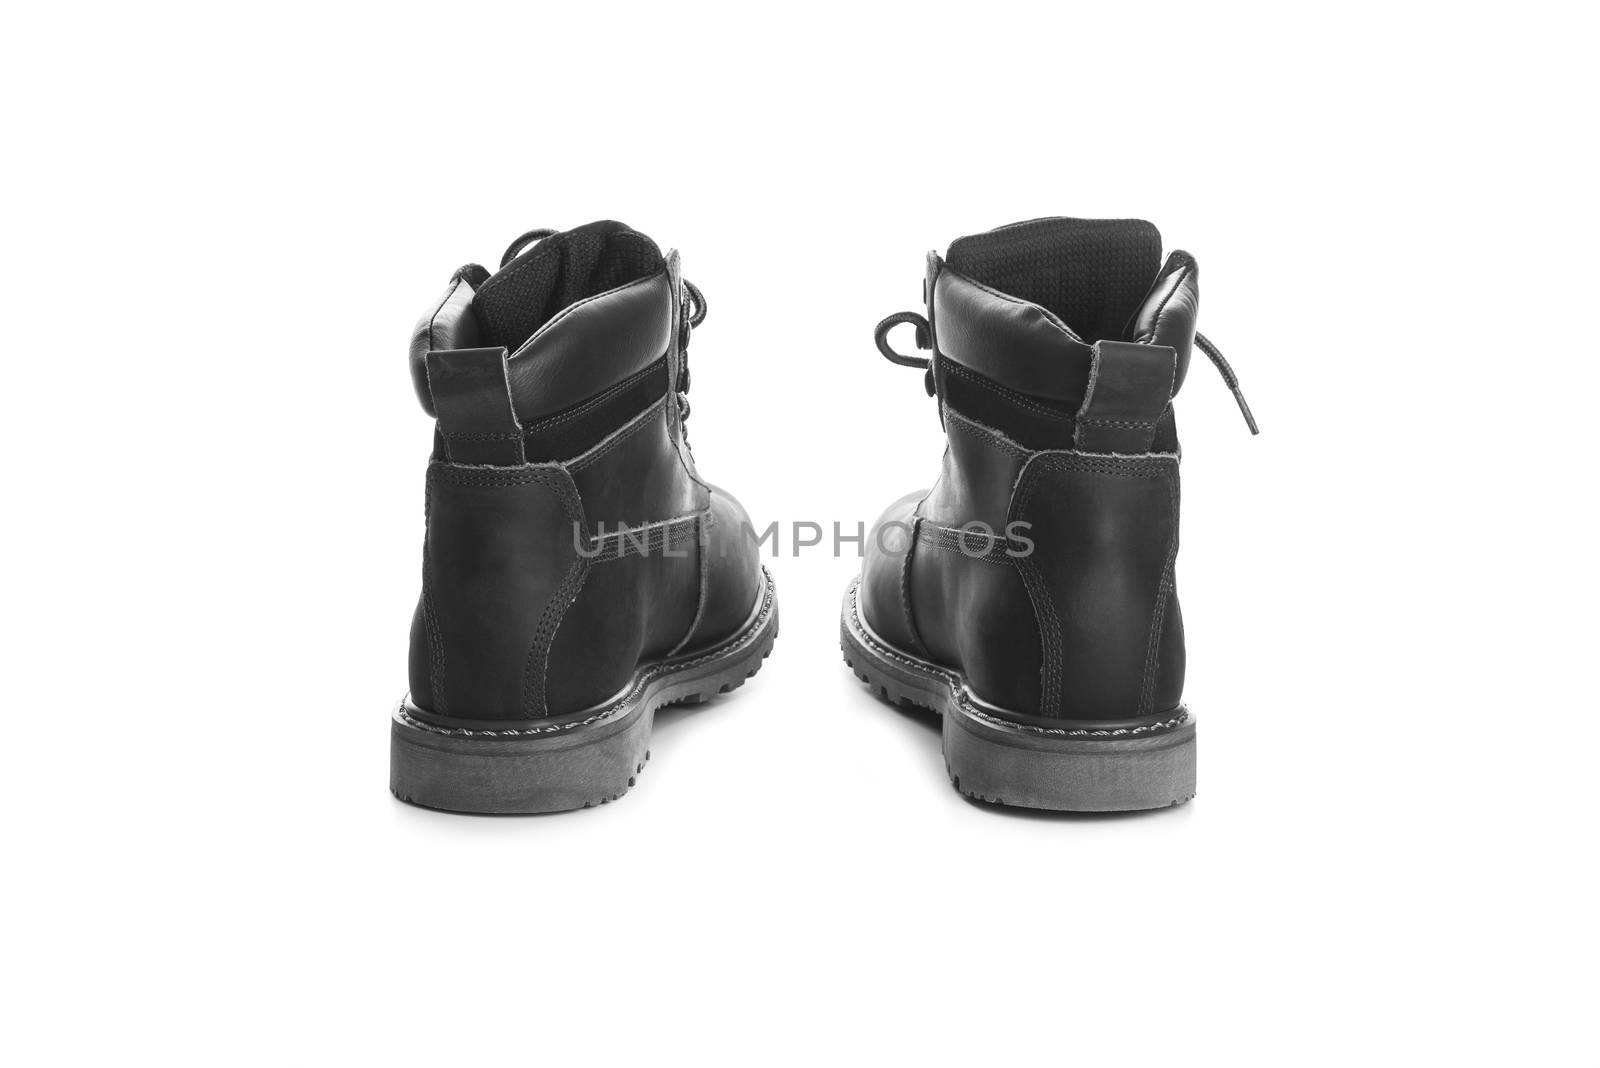 Man ankle boots, black color, with nubuck leather by SlayCer